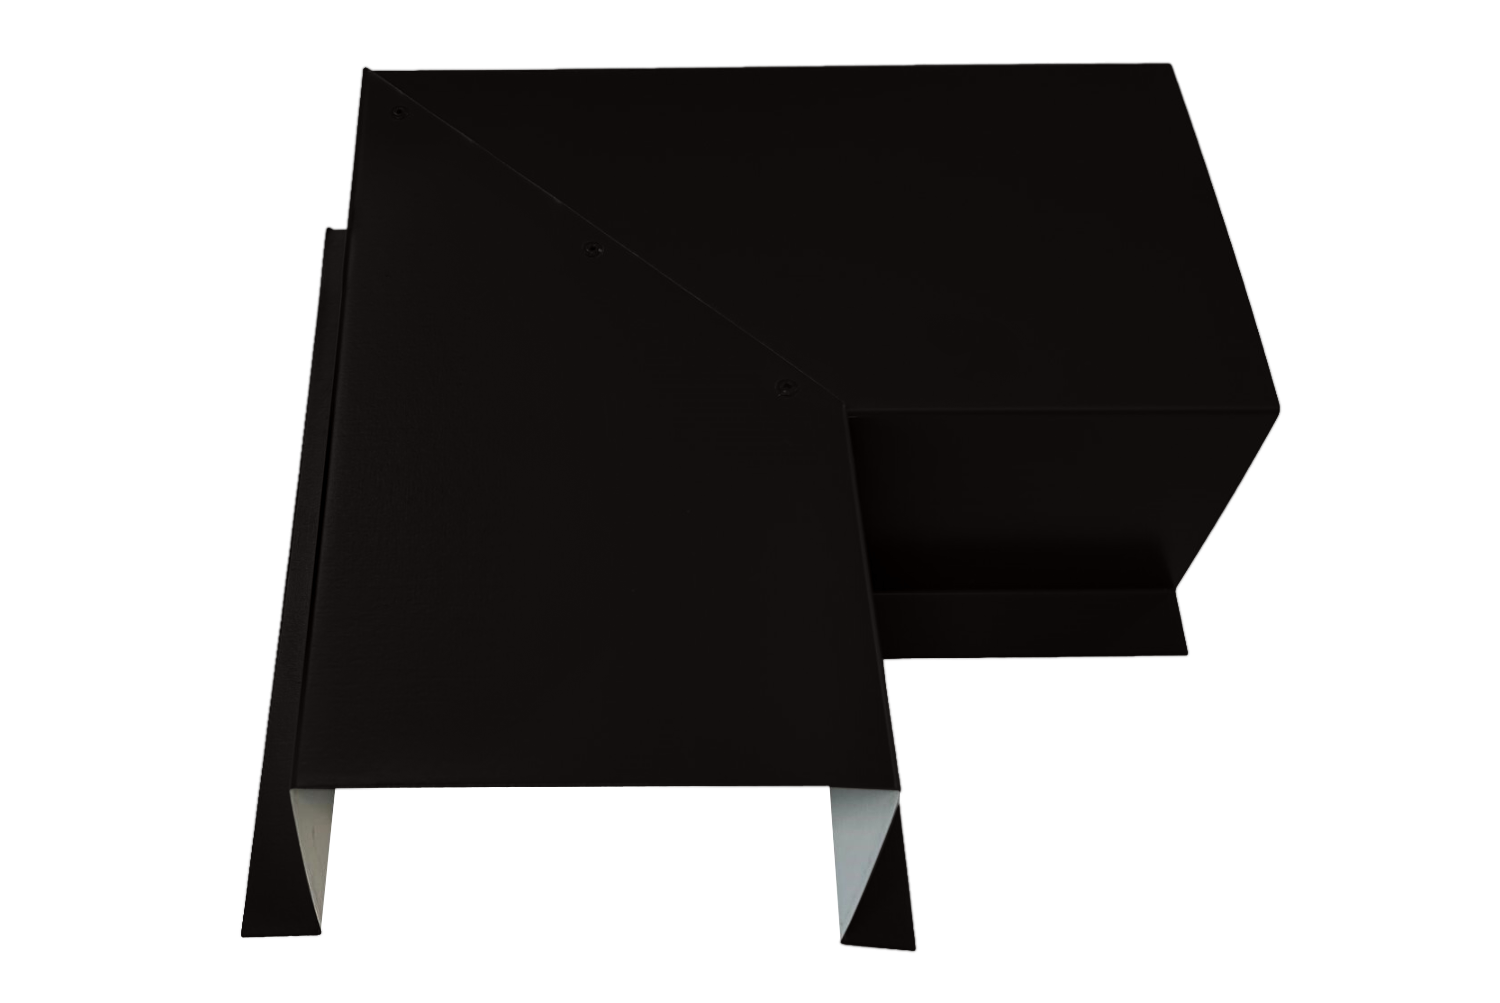 A black, geometric, and abstract modern art sculpture featuring sharp angles and folded sections crafted from Premium Quality 24 Gauge Line Set Cover Side Turning Elbows of the Commercial Series by Perma Cover. This intricate three-dimensional form casts shadows, adding depth and contrast to its appearance while ensuring durability for years to come.